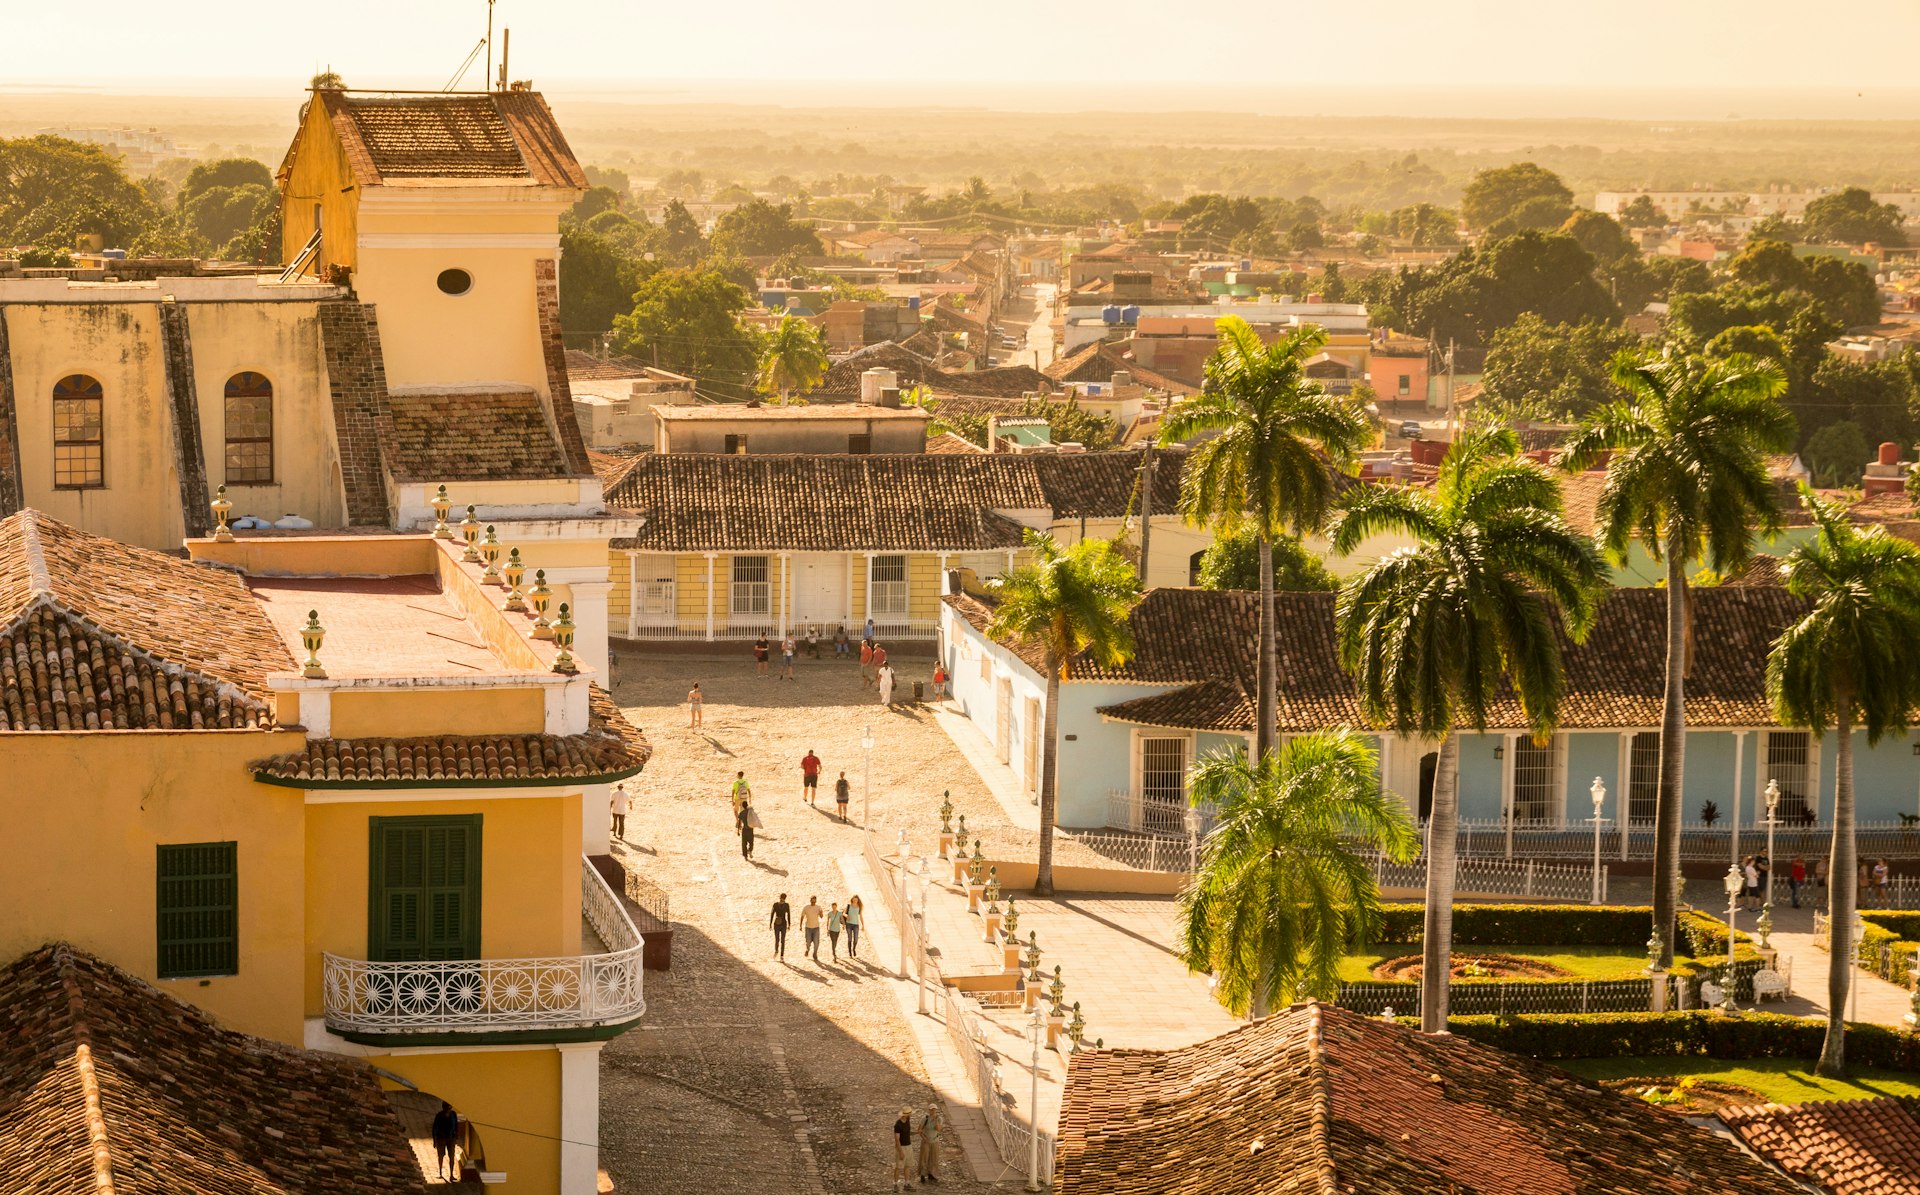 High-angle view of the colonial town of Trinidad, Cuba